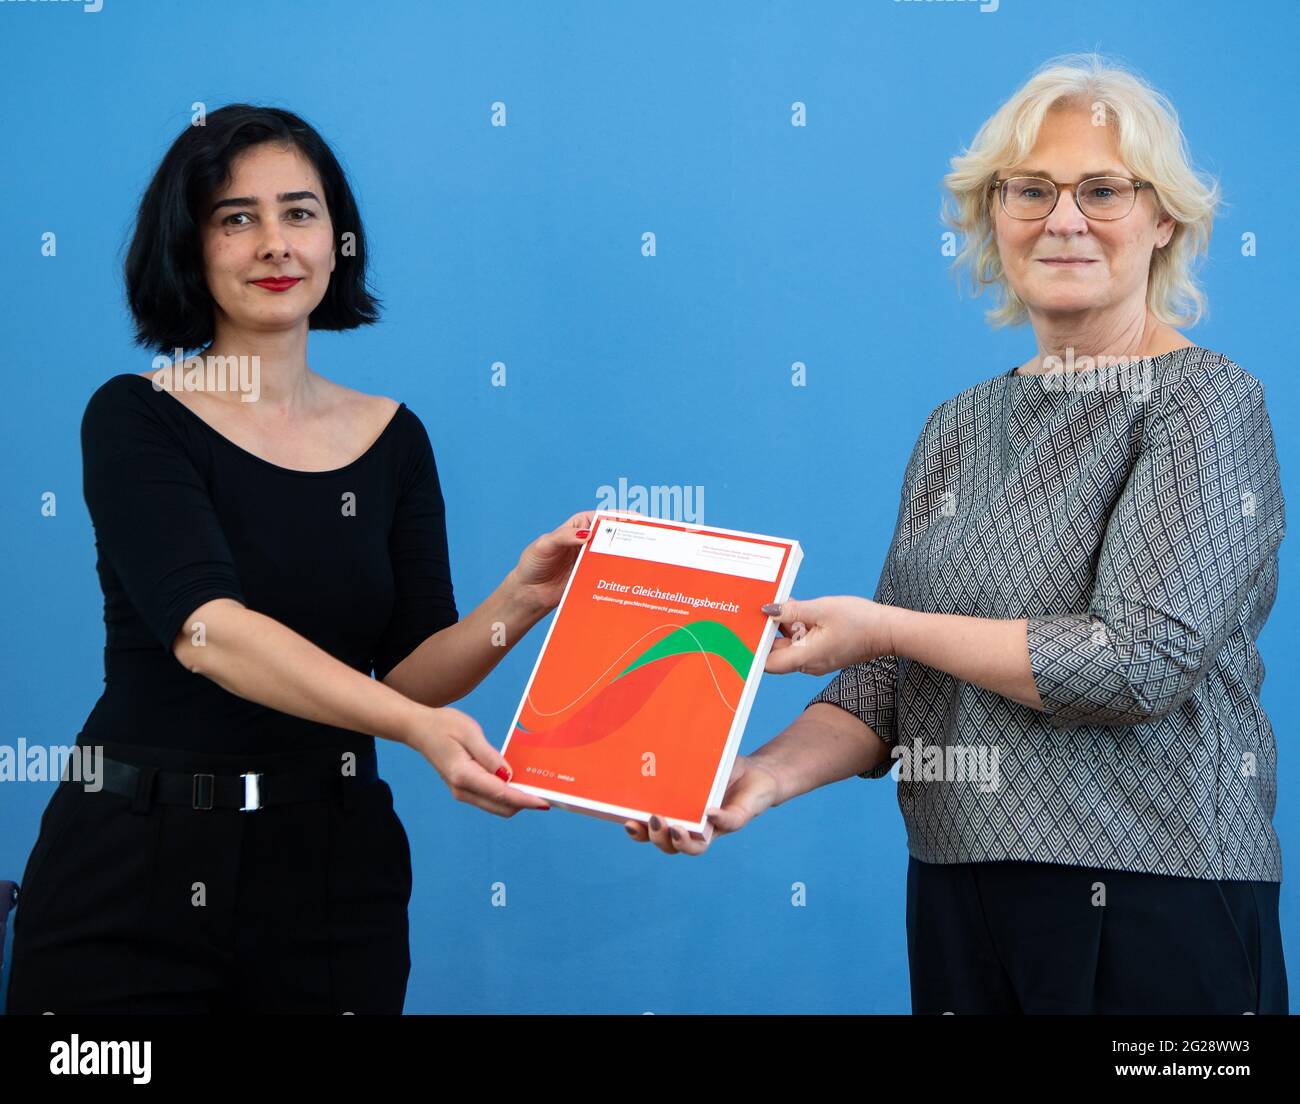 Berlin, Germany. 09th June, 2021. Christine Lambrecht (r, SPD), Federal Minister for Family Affairs, and Aysel Yollu-Tok, Chair of the Commission of Experts, present the Federal Government's Third Equality Report at the Federal Press Conference. The Third Equality Report addresses the question of what course needs to be set in order to shape developments in the digital economy in such a way that women and men have equal opportunities for realisation. Credit: Bernd von Jutrczenka/dpa/Alamy Live News Stock Photo